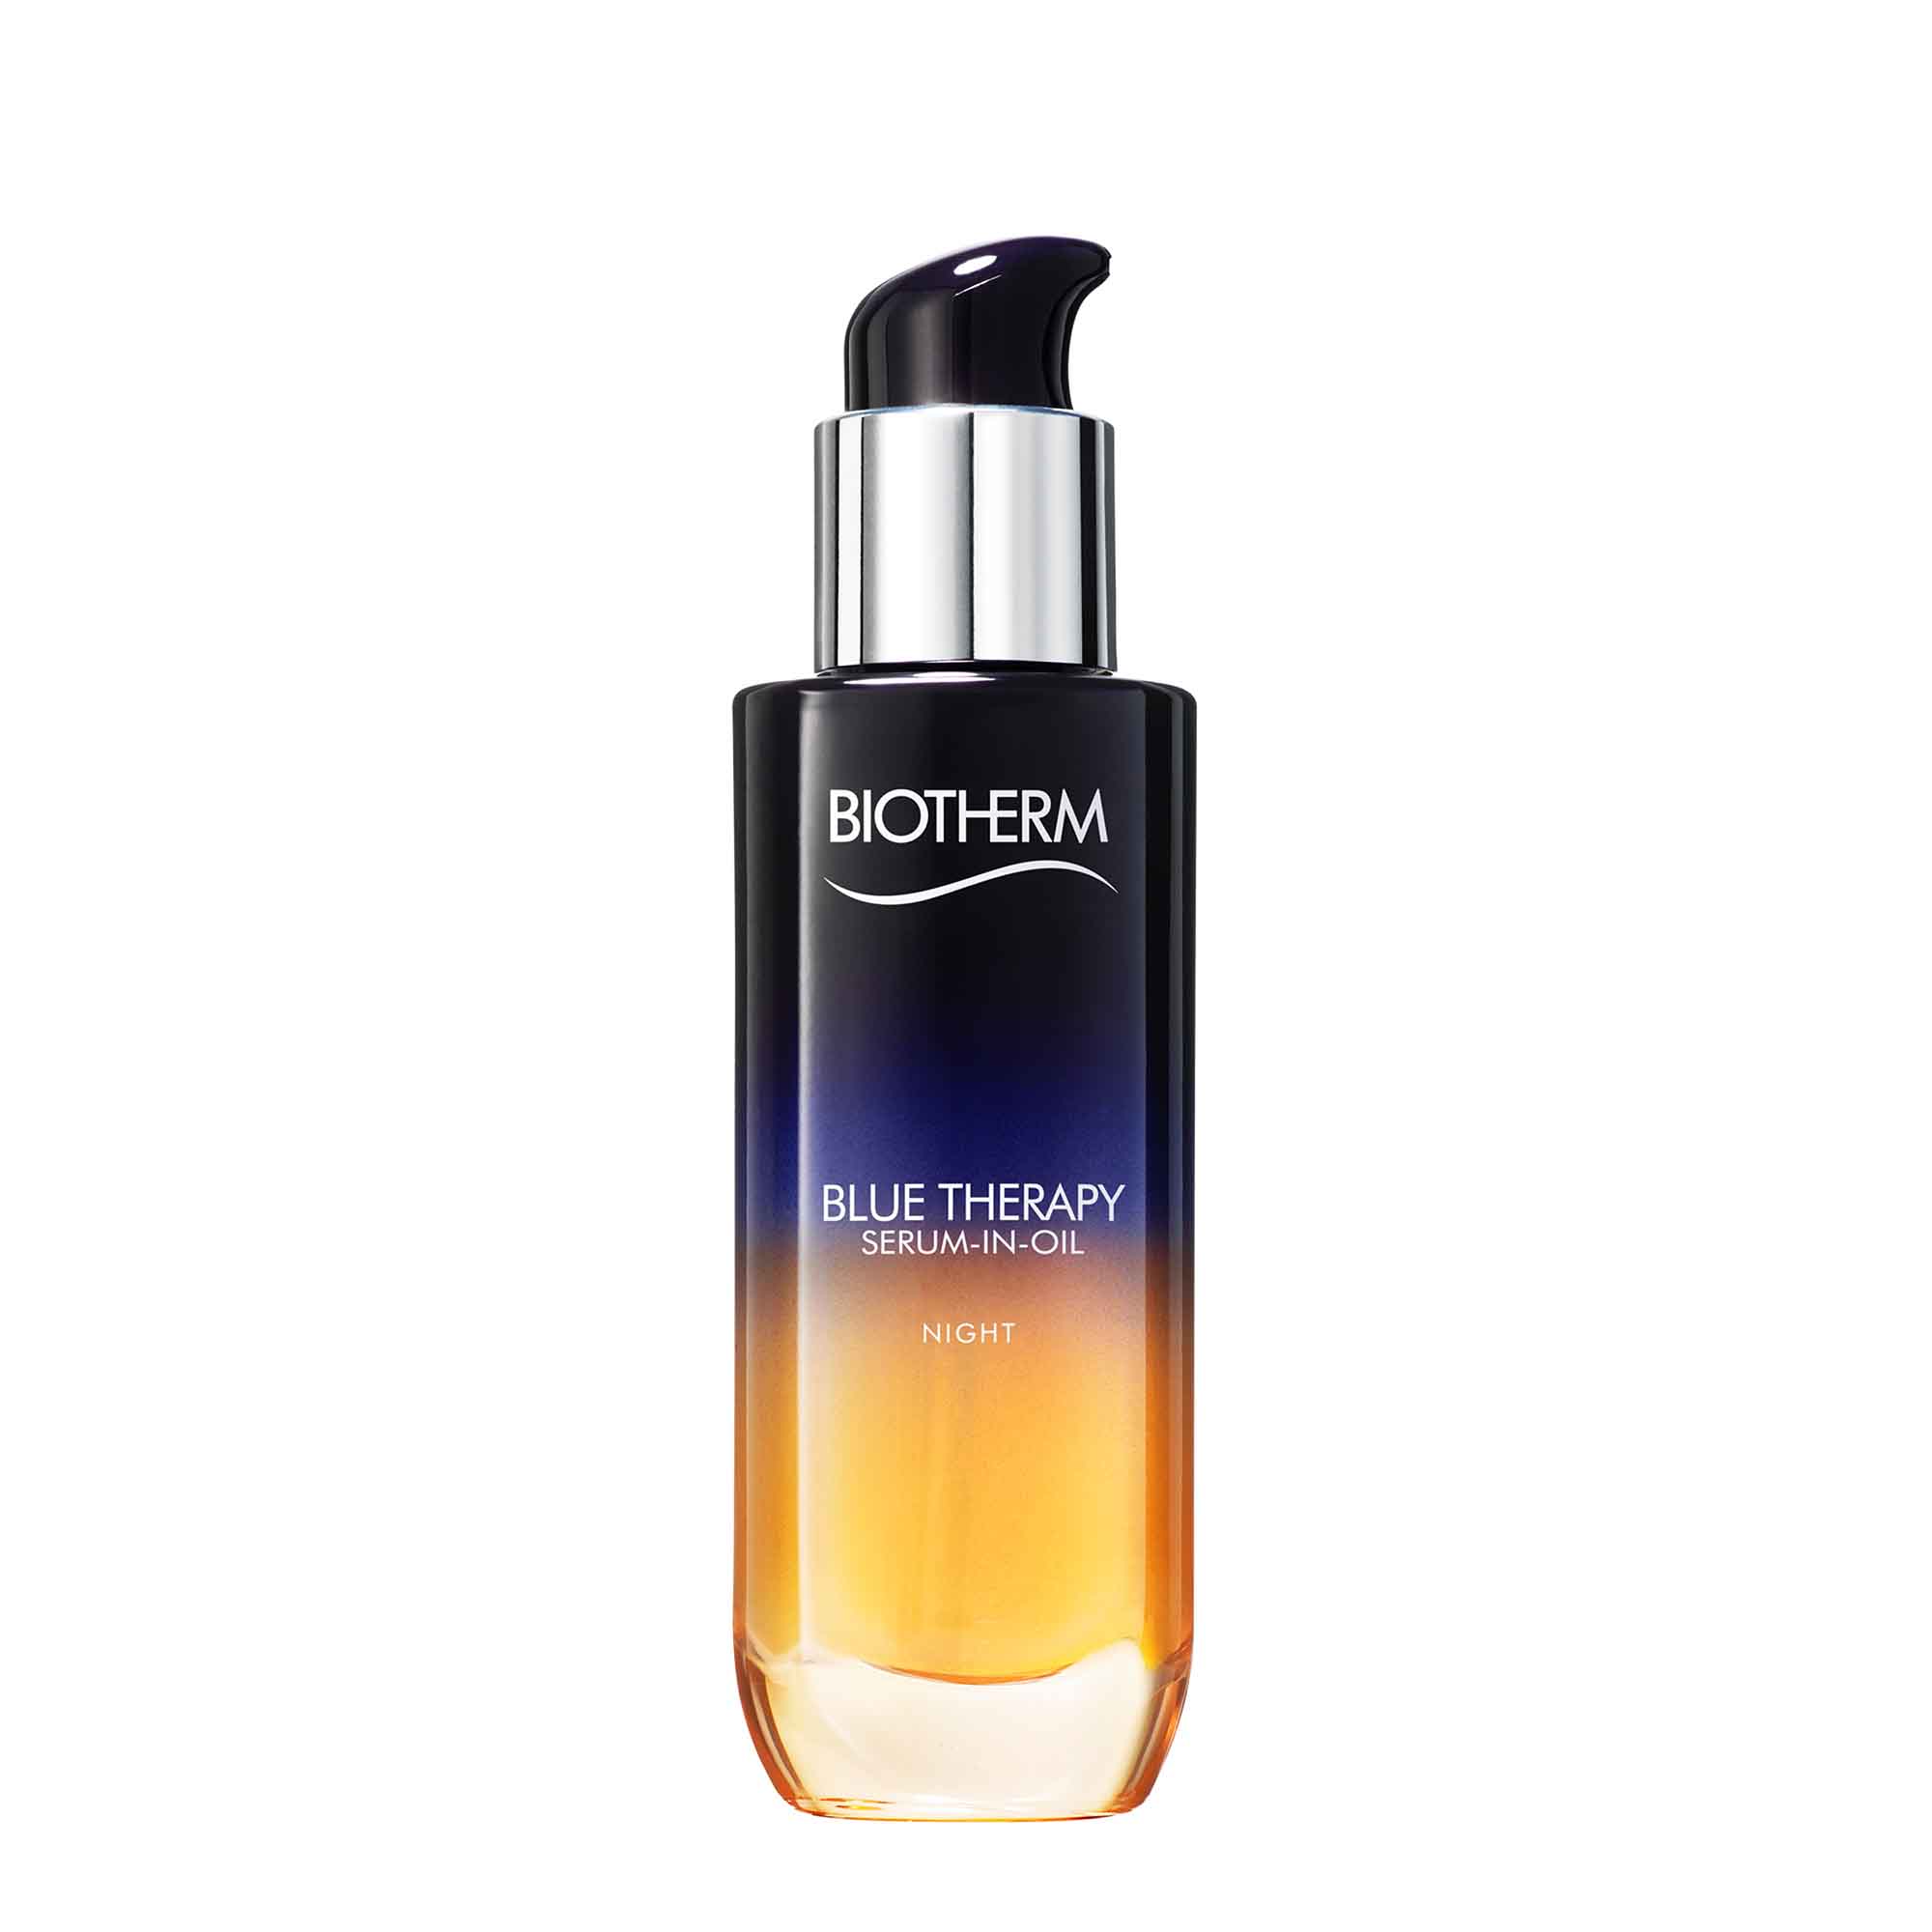 Blue Therapy Anti-Aging Serum In Oil Reduce The Look Of Wrinkles and Bounce for Skin | Biotherm